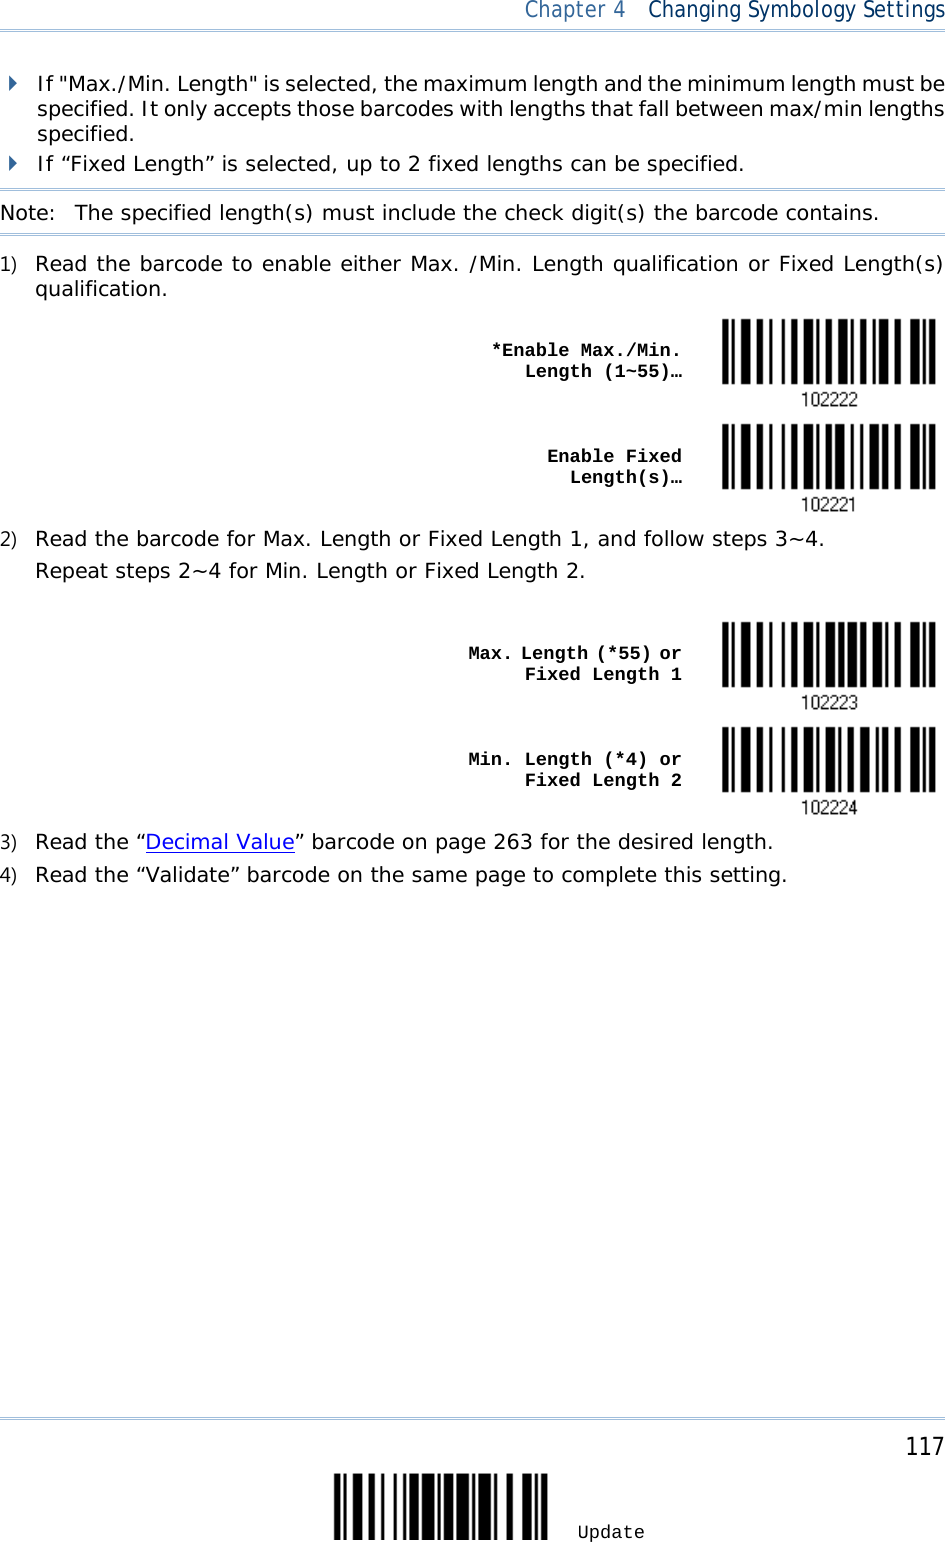  Chapter 4  Changing Symbology Settings   If &quot;Max./Min. Length&quot; is selected, the maximum length and the minimum length must be specified. It only accepts those barcodes with lengths that fall between max/min lengths specified.  If “Fixed Length” is selected, up to 2 fixed lengths can be specified. Note:   The specified length(s) must include the check digit(s) the barcode contains. 1) Read the barcode to enable either Max. /Min. Length qualification or Fixed Length(s) qualification.    *Enable Max./Min. Length (1~55)…     Enable Fixed Length(s)…  2) Read the barcode for Max. Length or Fixed Length 1, and follow steps 3~4. Repeat steps 2~4 for Min. Length or Fixed Length 2.     Max. Length (*55) or Fixed Length 1     Min. Length (*4) or Fixed Length 2  3) Read the “Decimal Value” barcode on page 263 for the desired length.  4) Read the “Validate” barcode on the same page to complete this setting.     117 Update 